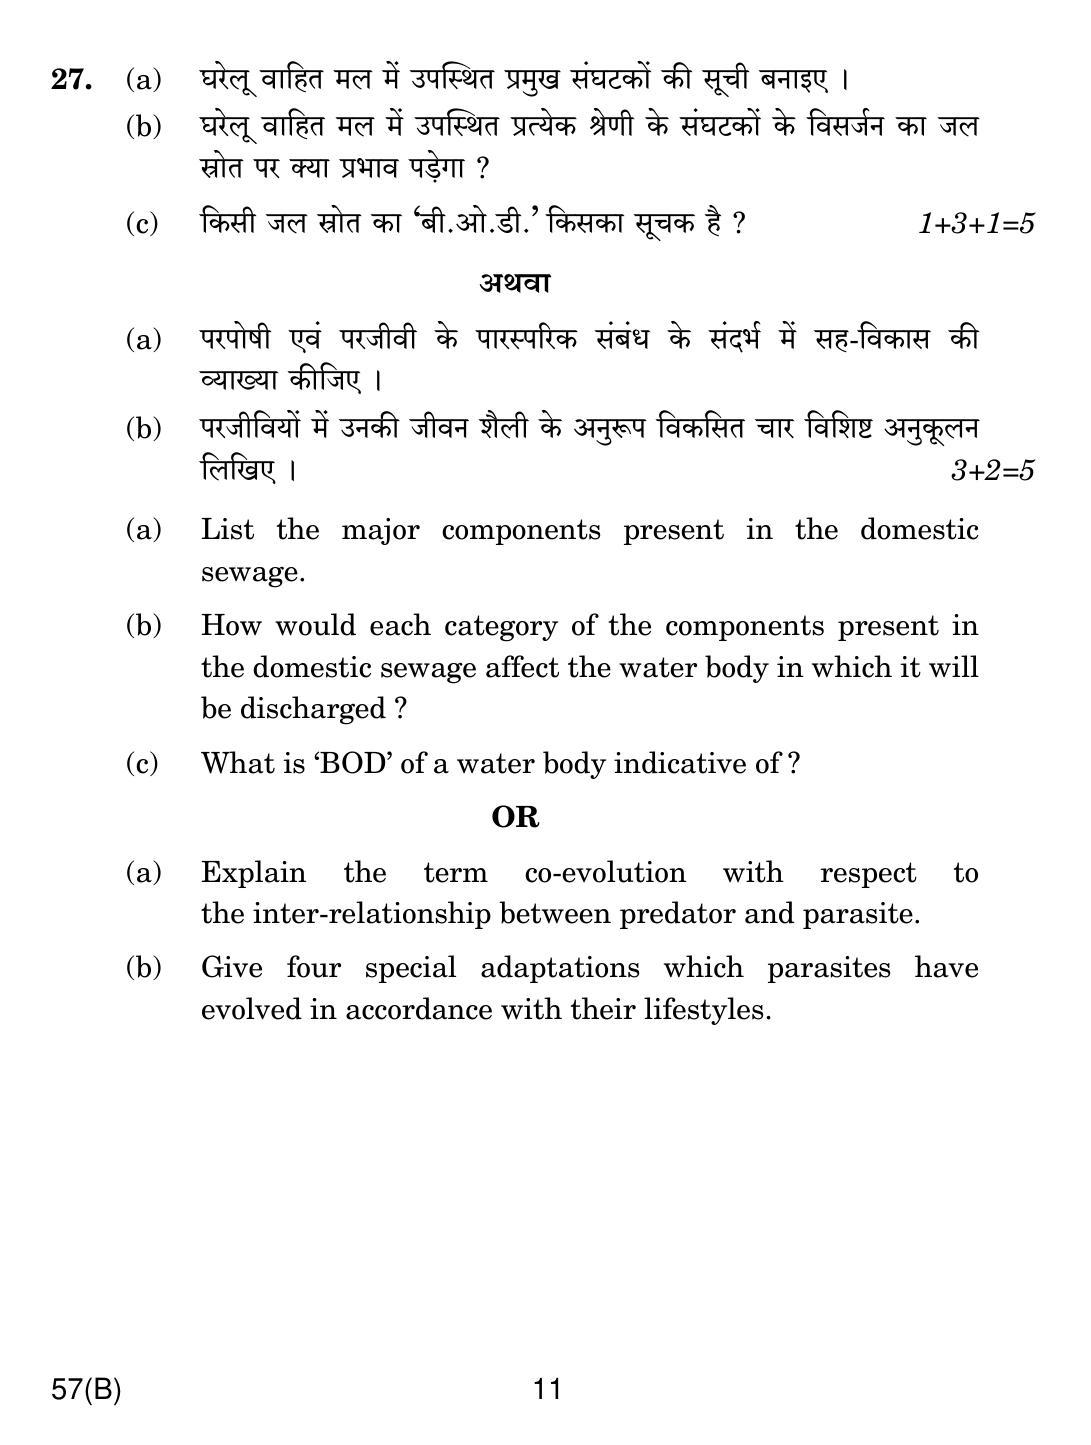 CBSE Class 12 57(B) BIOLOGY 2019 Compartment Question Paper - Page 11